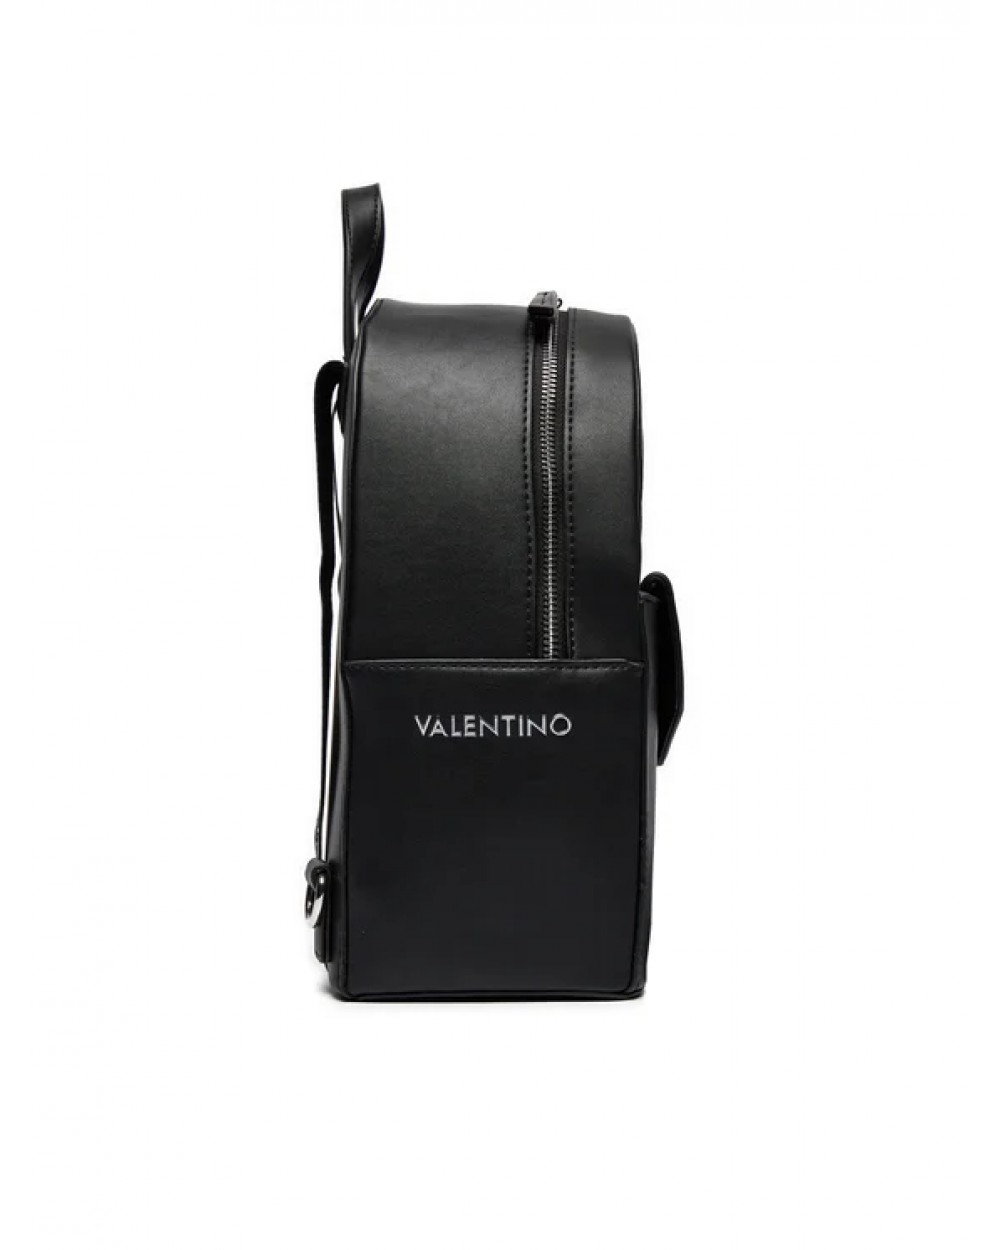 VALENTINO BAGS BACKPACK VBS7QP02